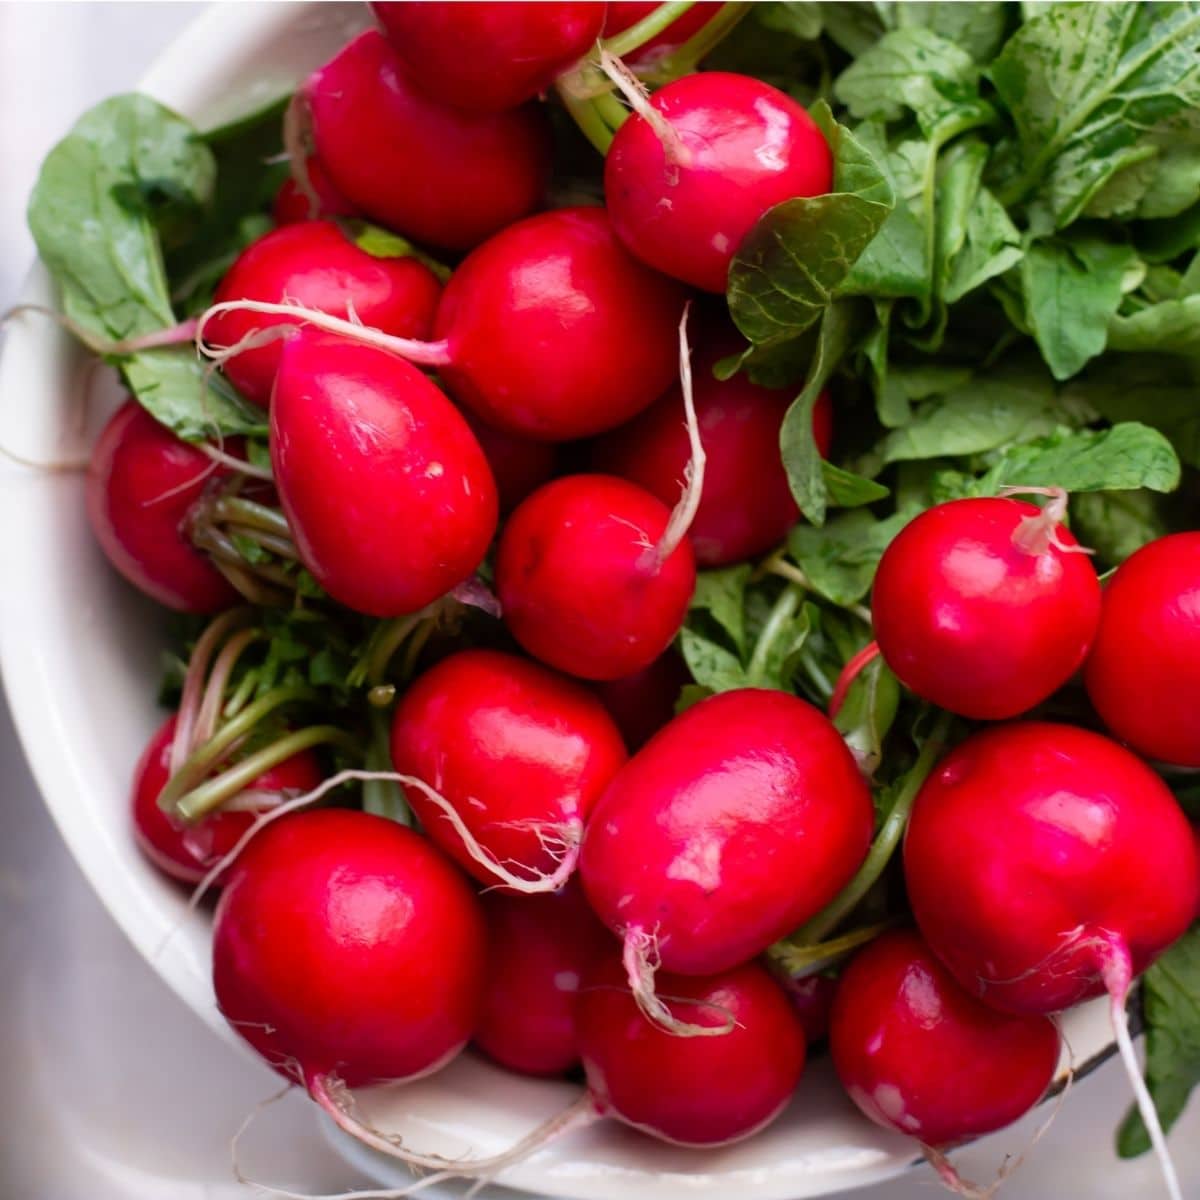 Freshly washed radishes in a colander in the sink.